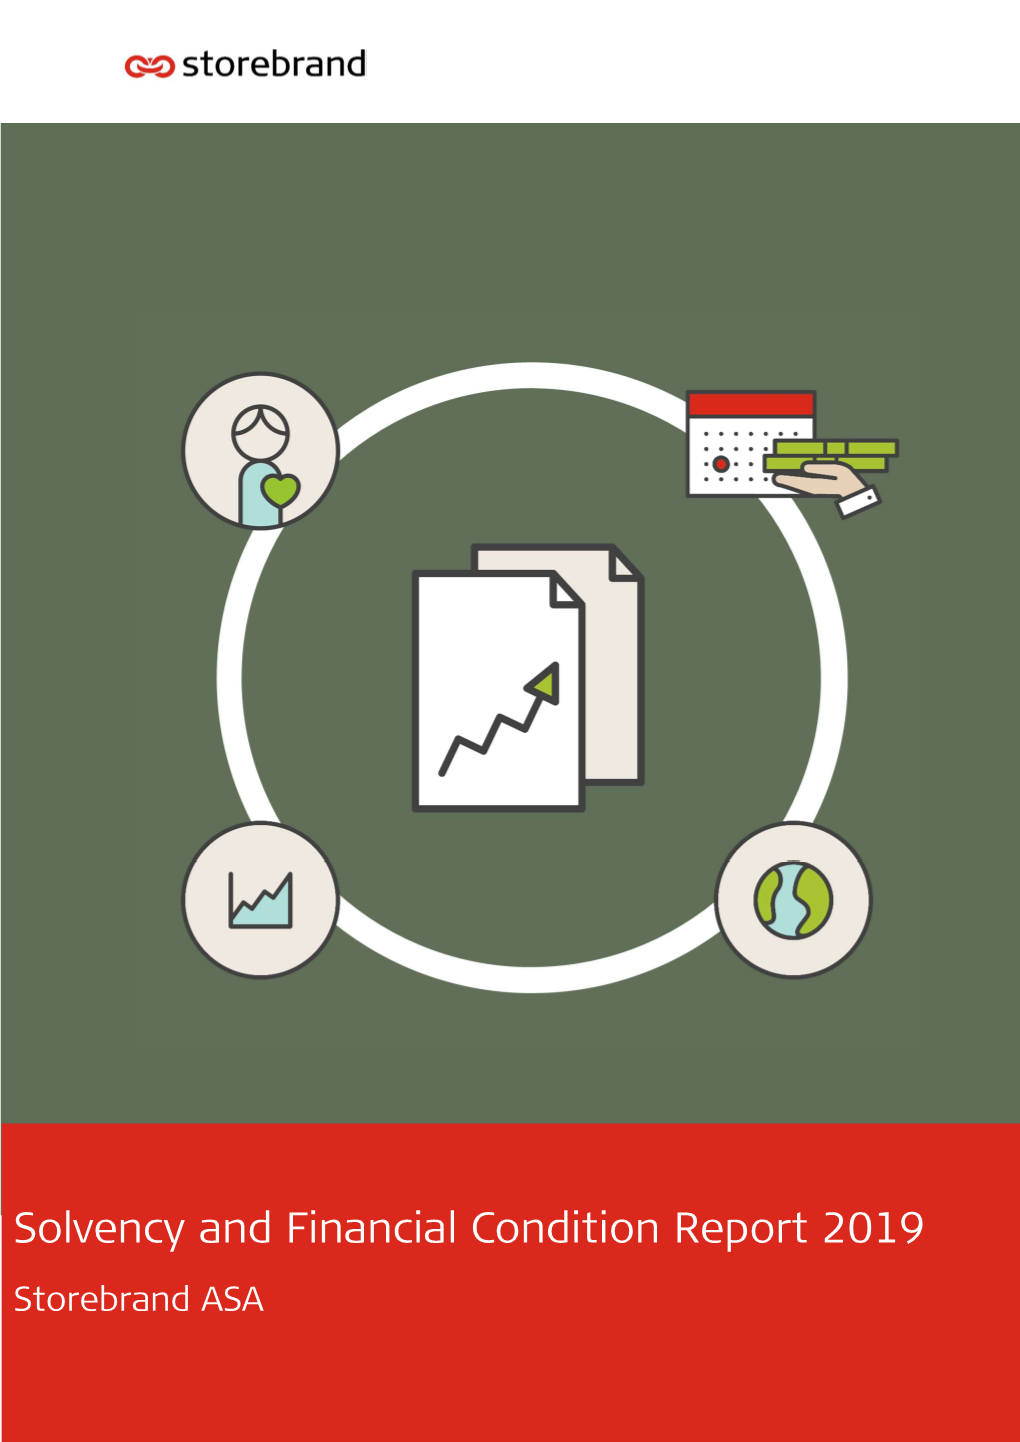 1 Solvency and Financial Condition Report Storebrand ASA